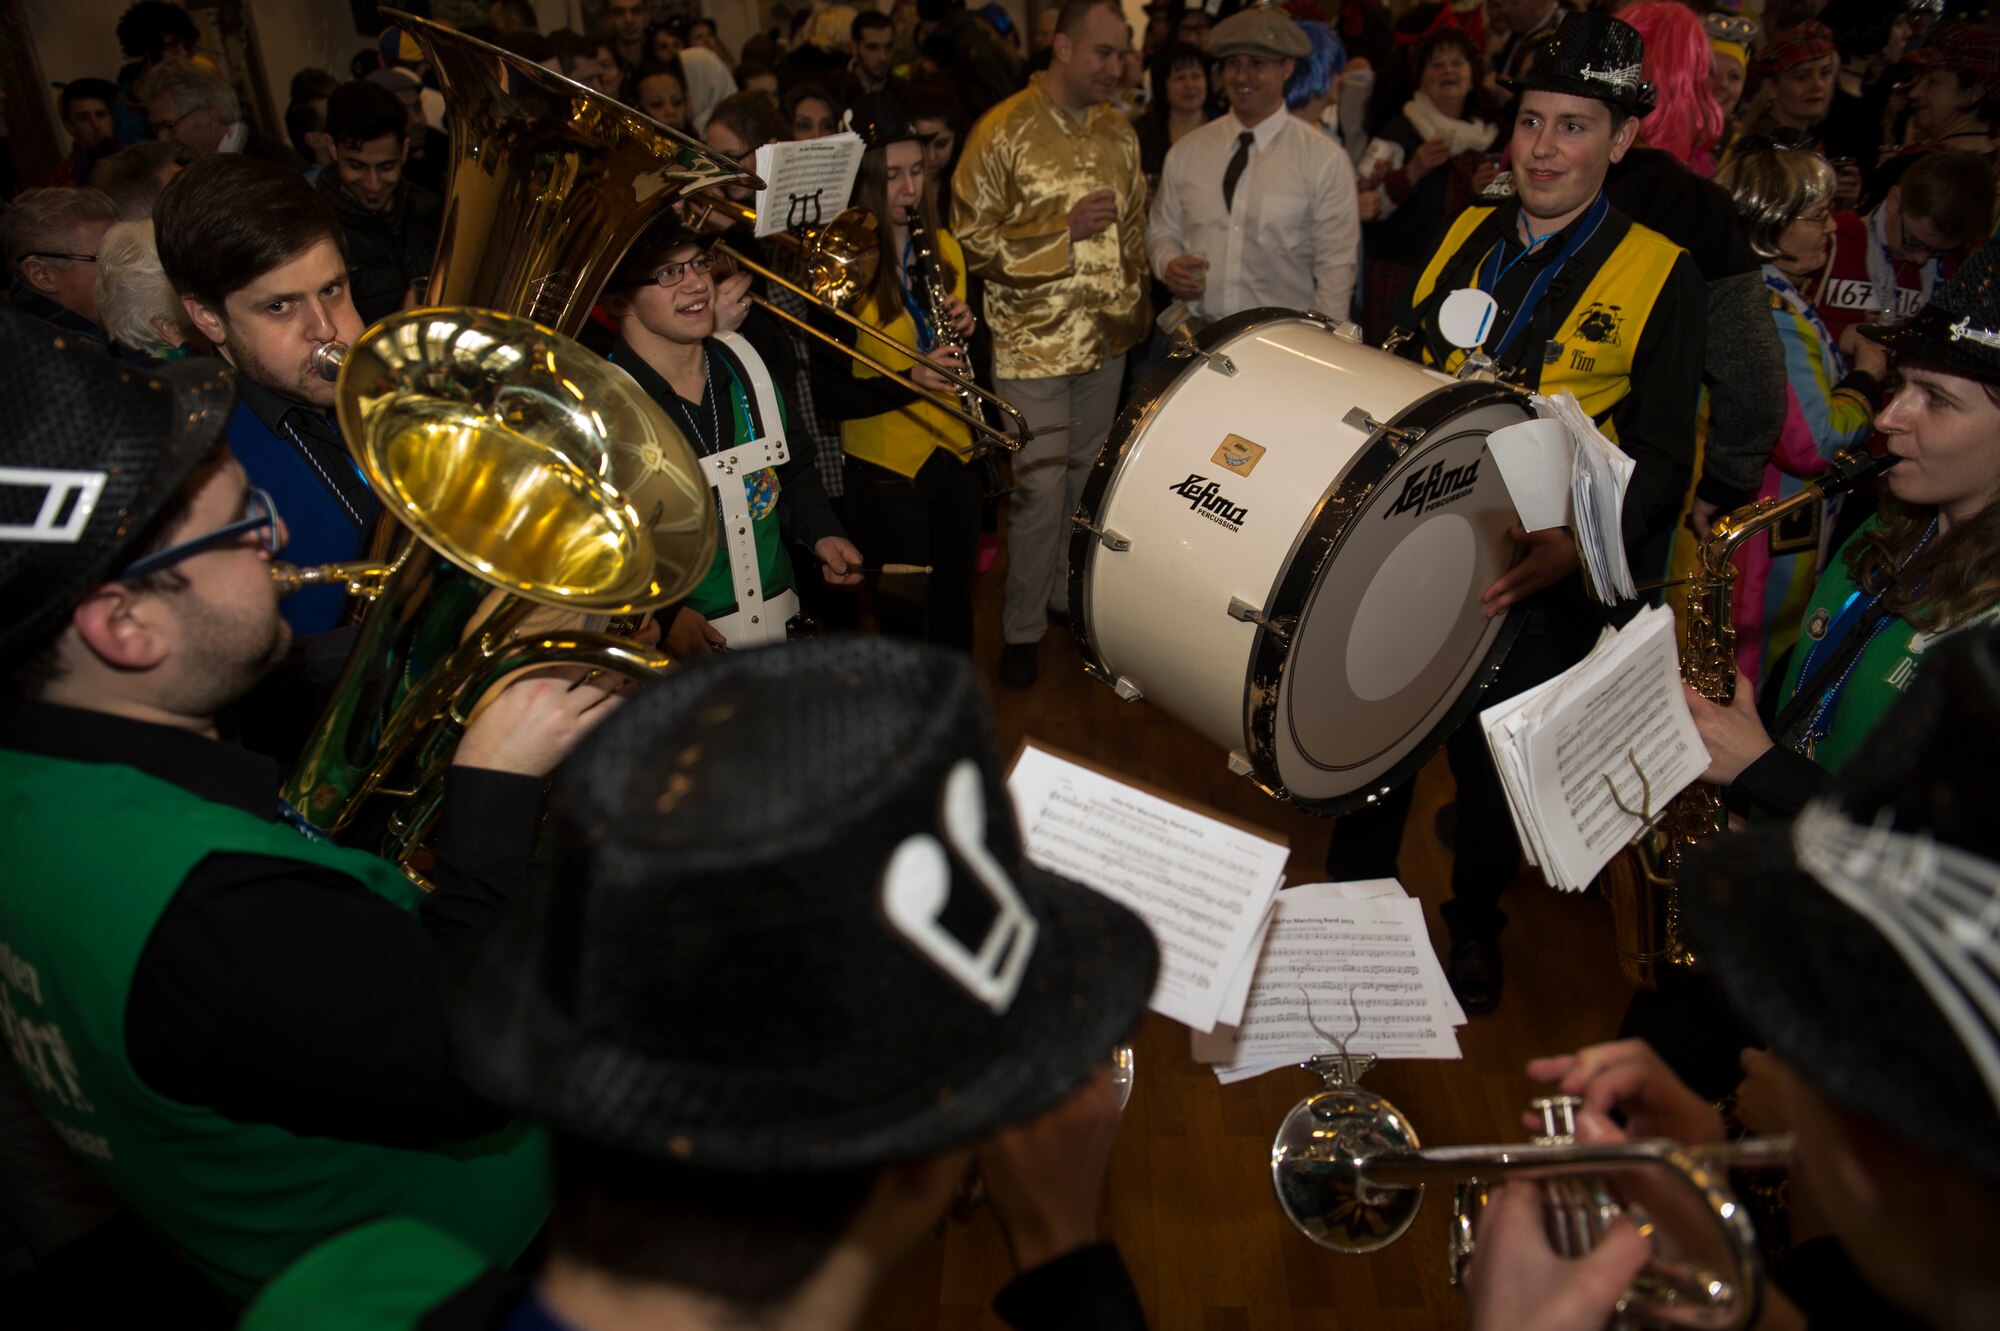 Musicians play music while revelers lock arms and dance to music as part of a Fasching celebration at the city hall in Bitburg, Germany, Feb. 22, 2017. Fasching is a yearly celebration put on by the Germans to commemorate the start of the spring season. (U.S. Air Force photo by Senior Airman Dawn M. Weber)